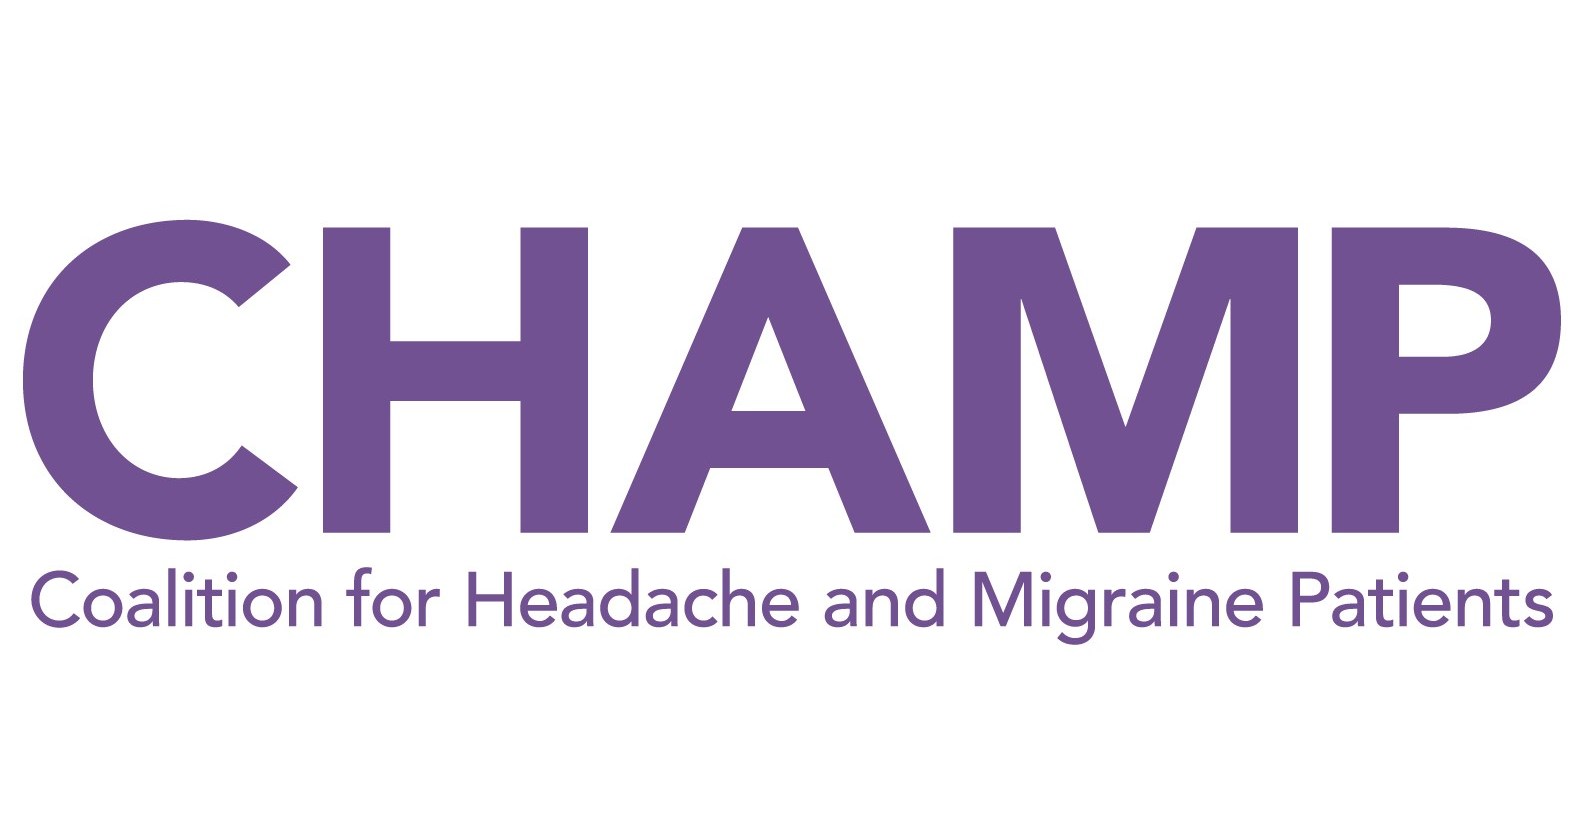 Coalition for Headache and Migraine Patients Logo